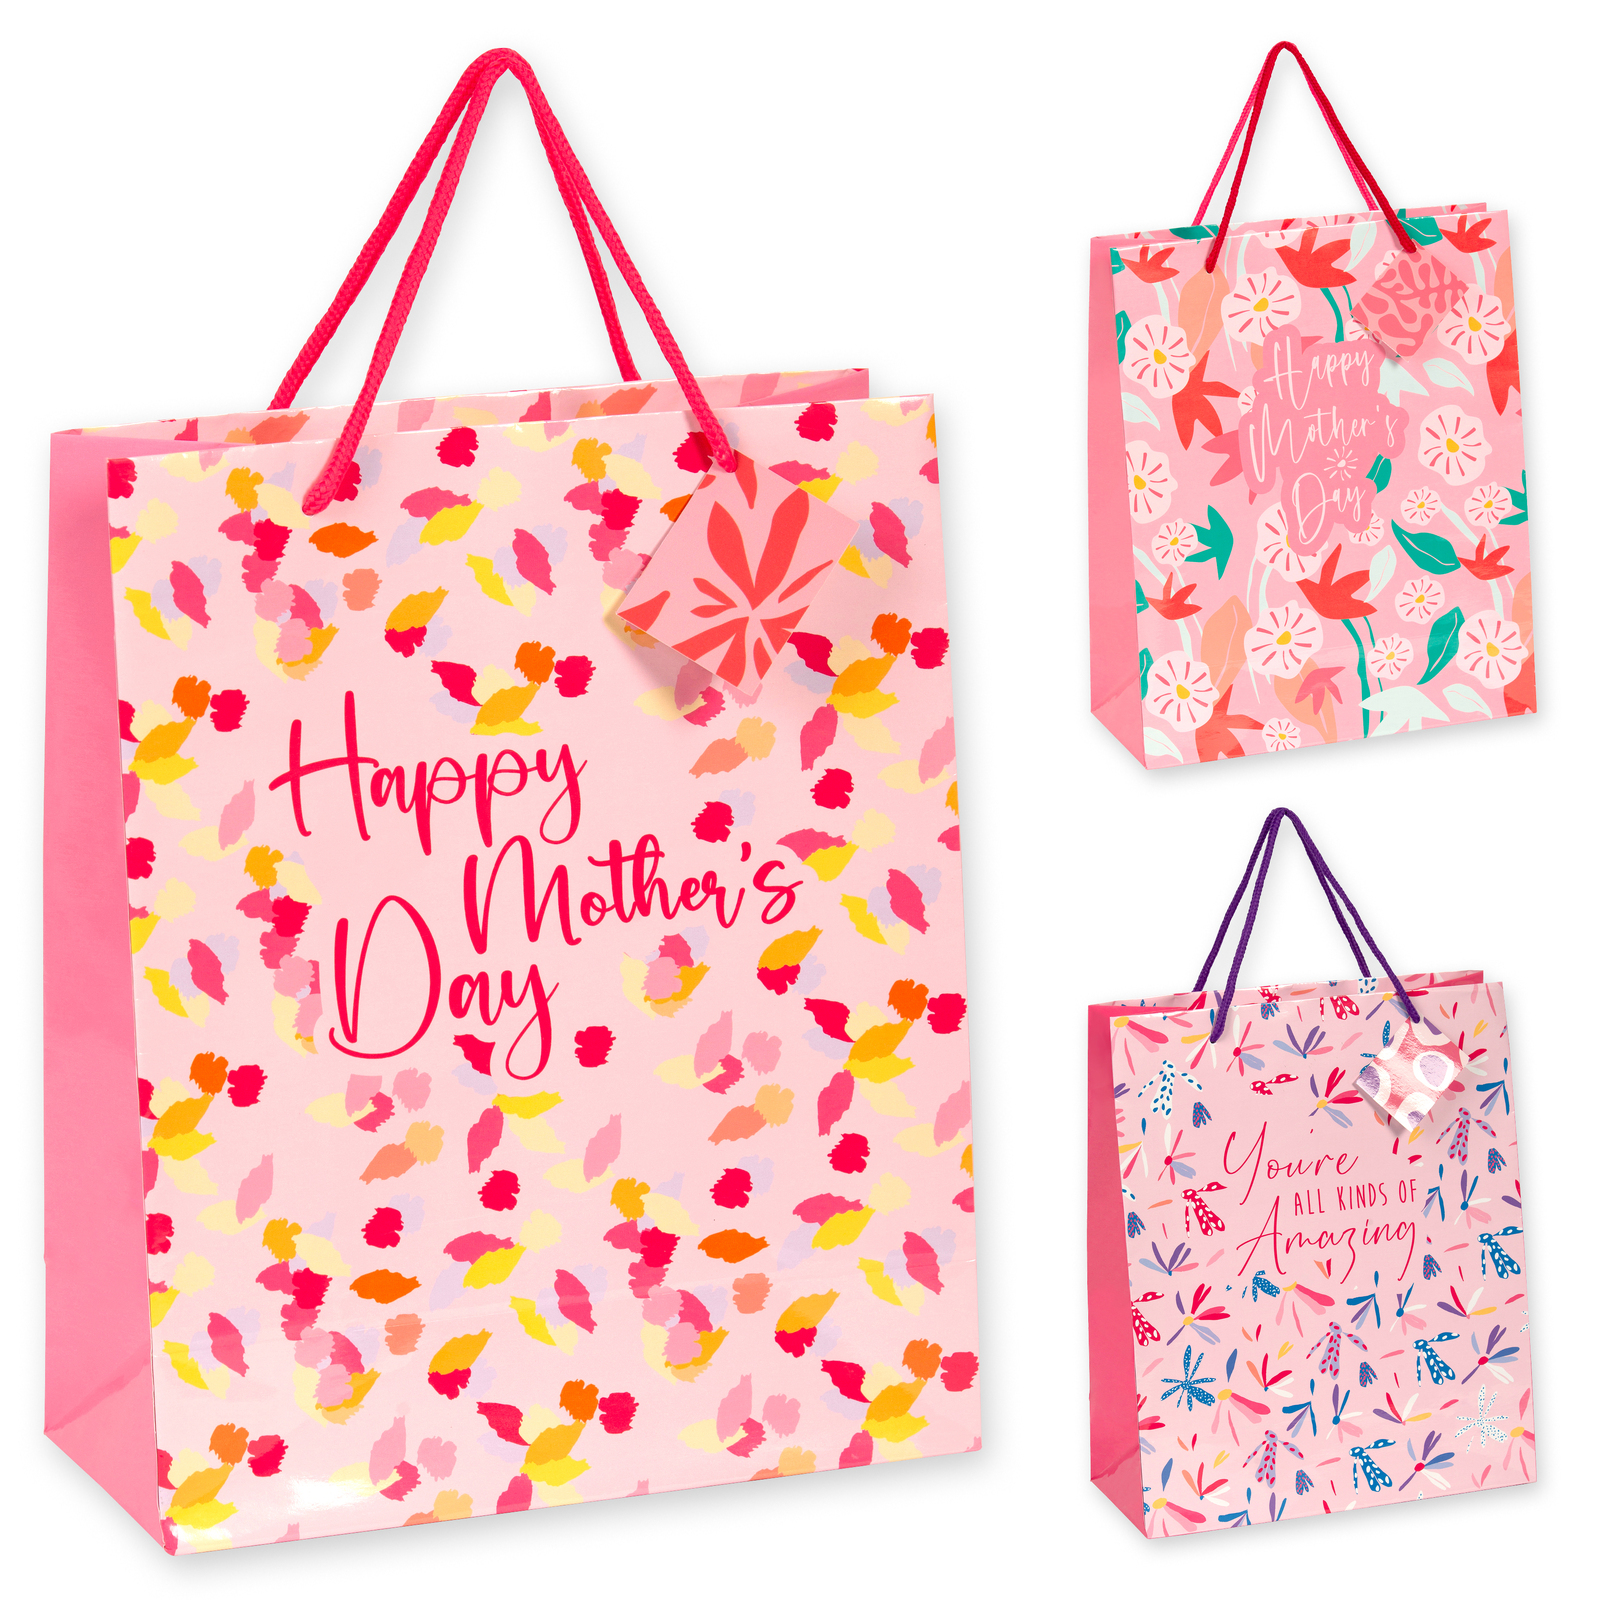 Large Gift Bag With Gift Tag - Pack of 12 ($1.50 ea)